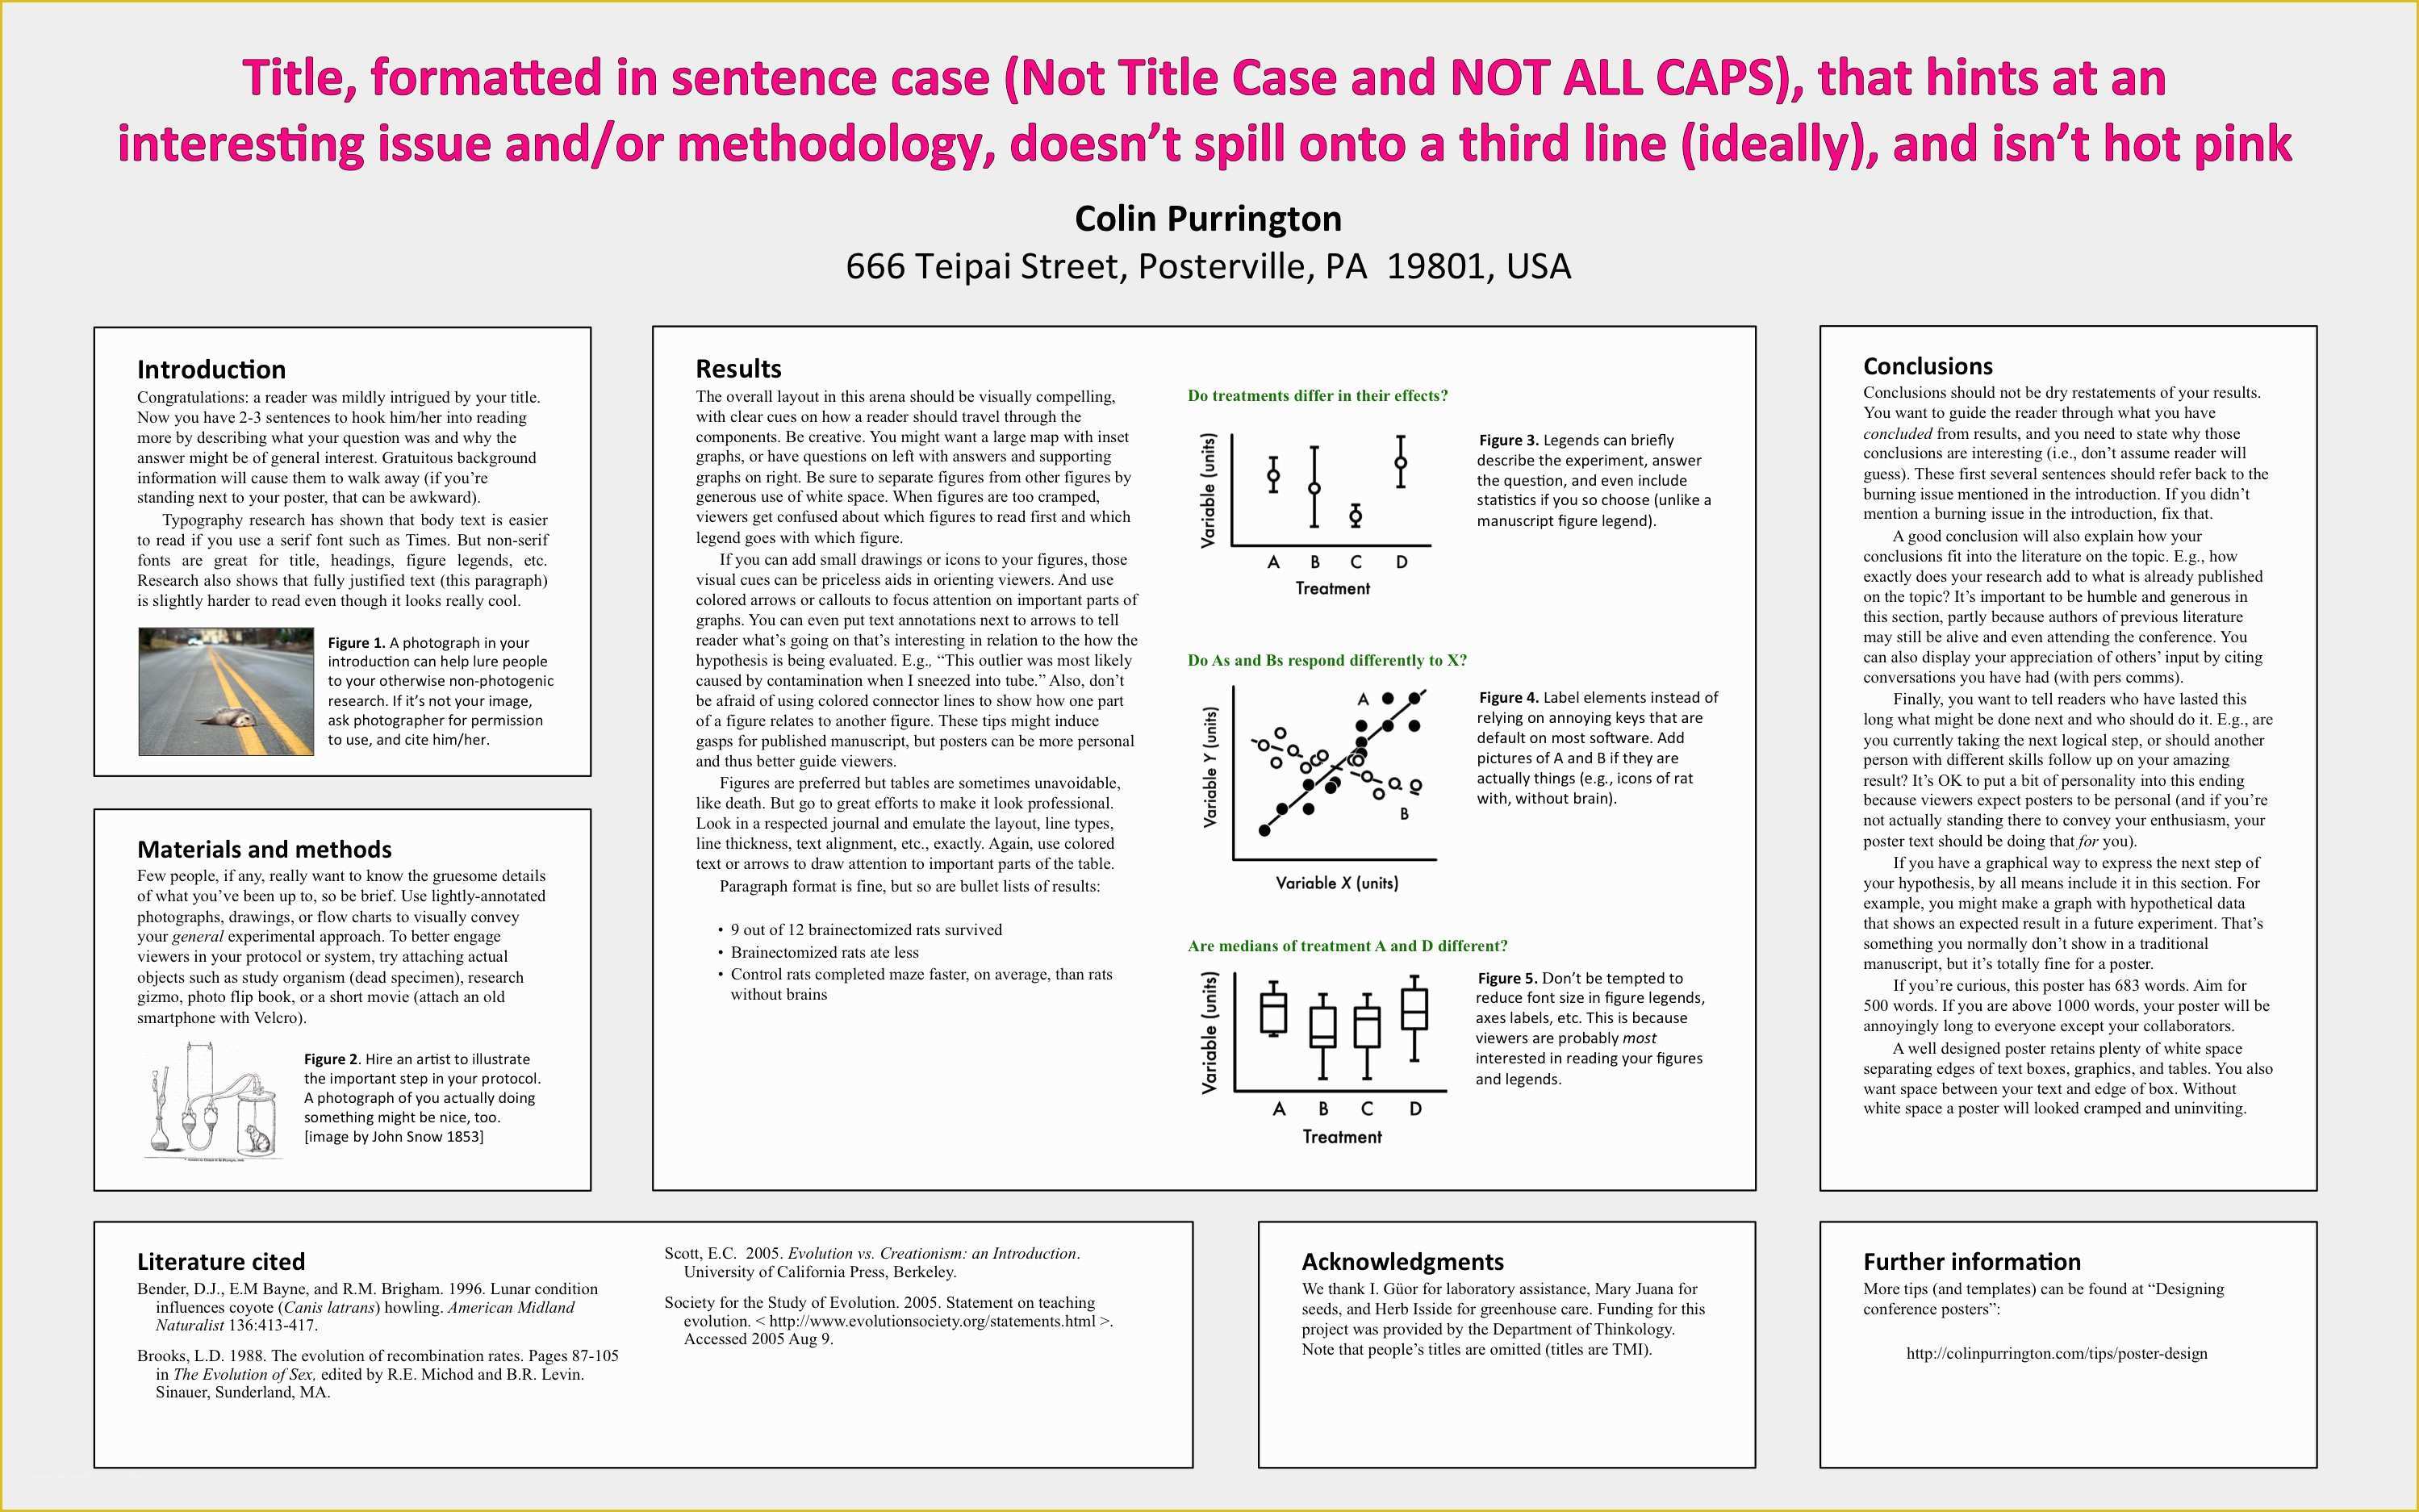 Scientific Poster Template Free Of Designing Conference Posters Colin Purrington